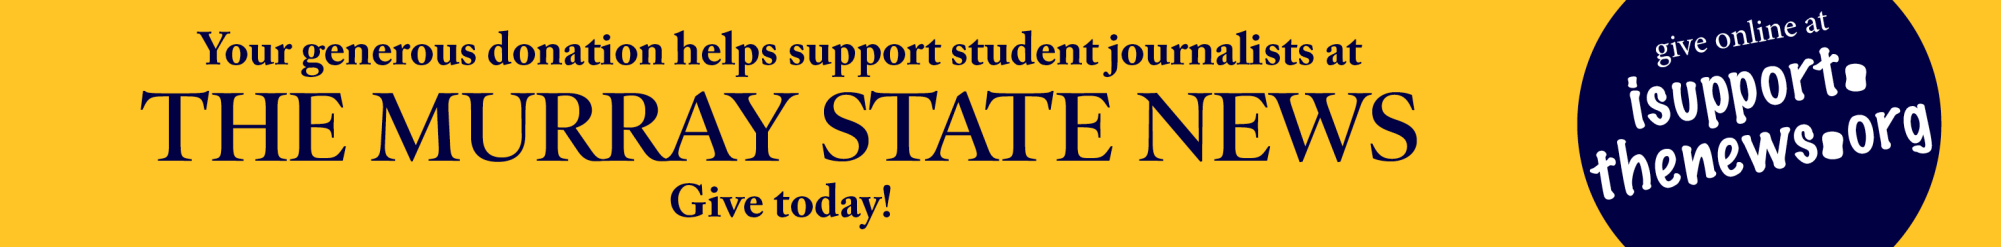 Your generous donation supports The Murray State News!